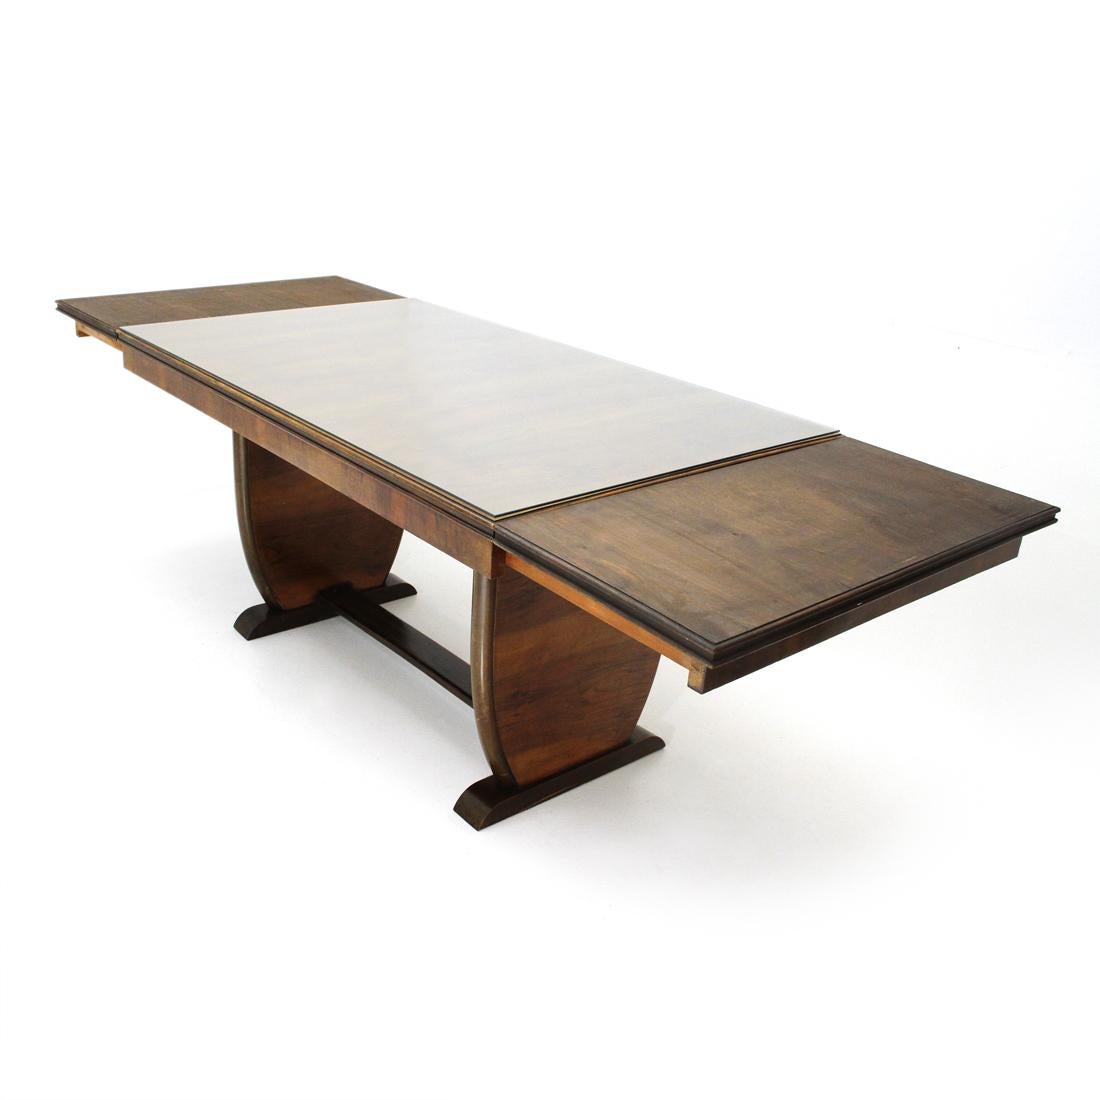 Italian Wooden Dining Table, 1940s For Sale 2